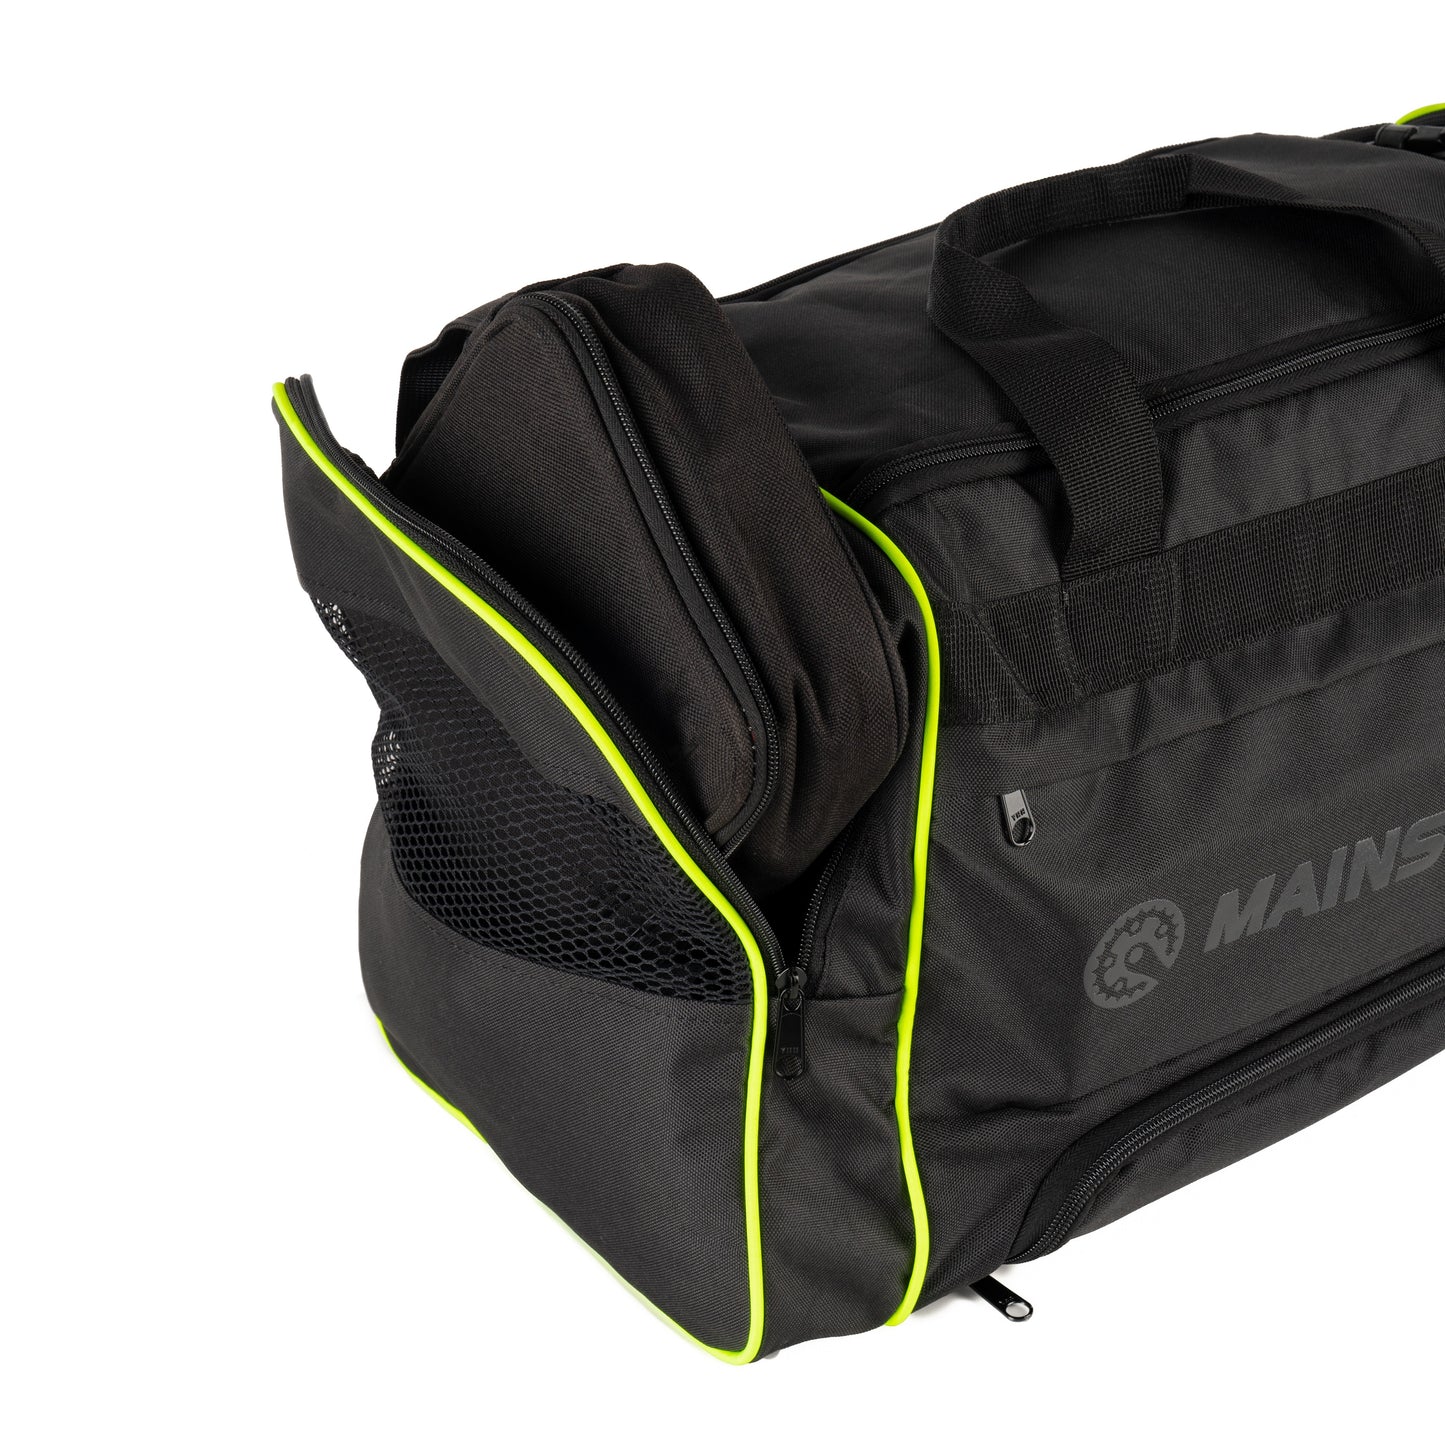 AZA x MAINSEPEDA Cycling Gymbag Safety First Edition